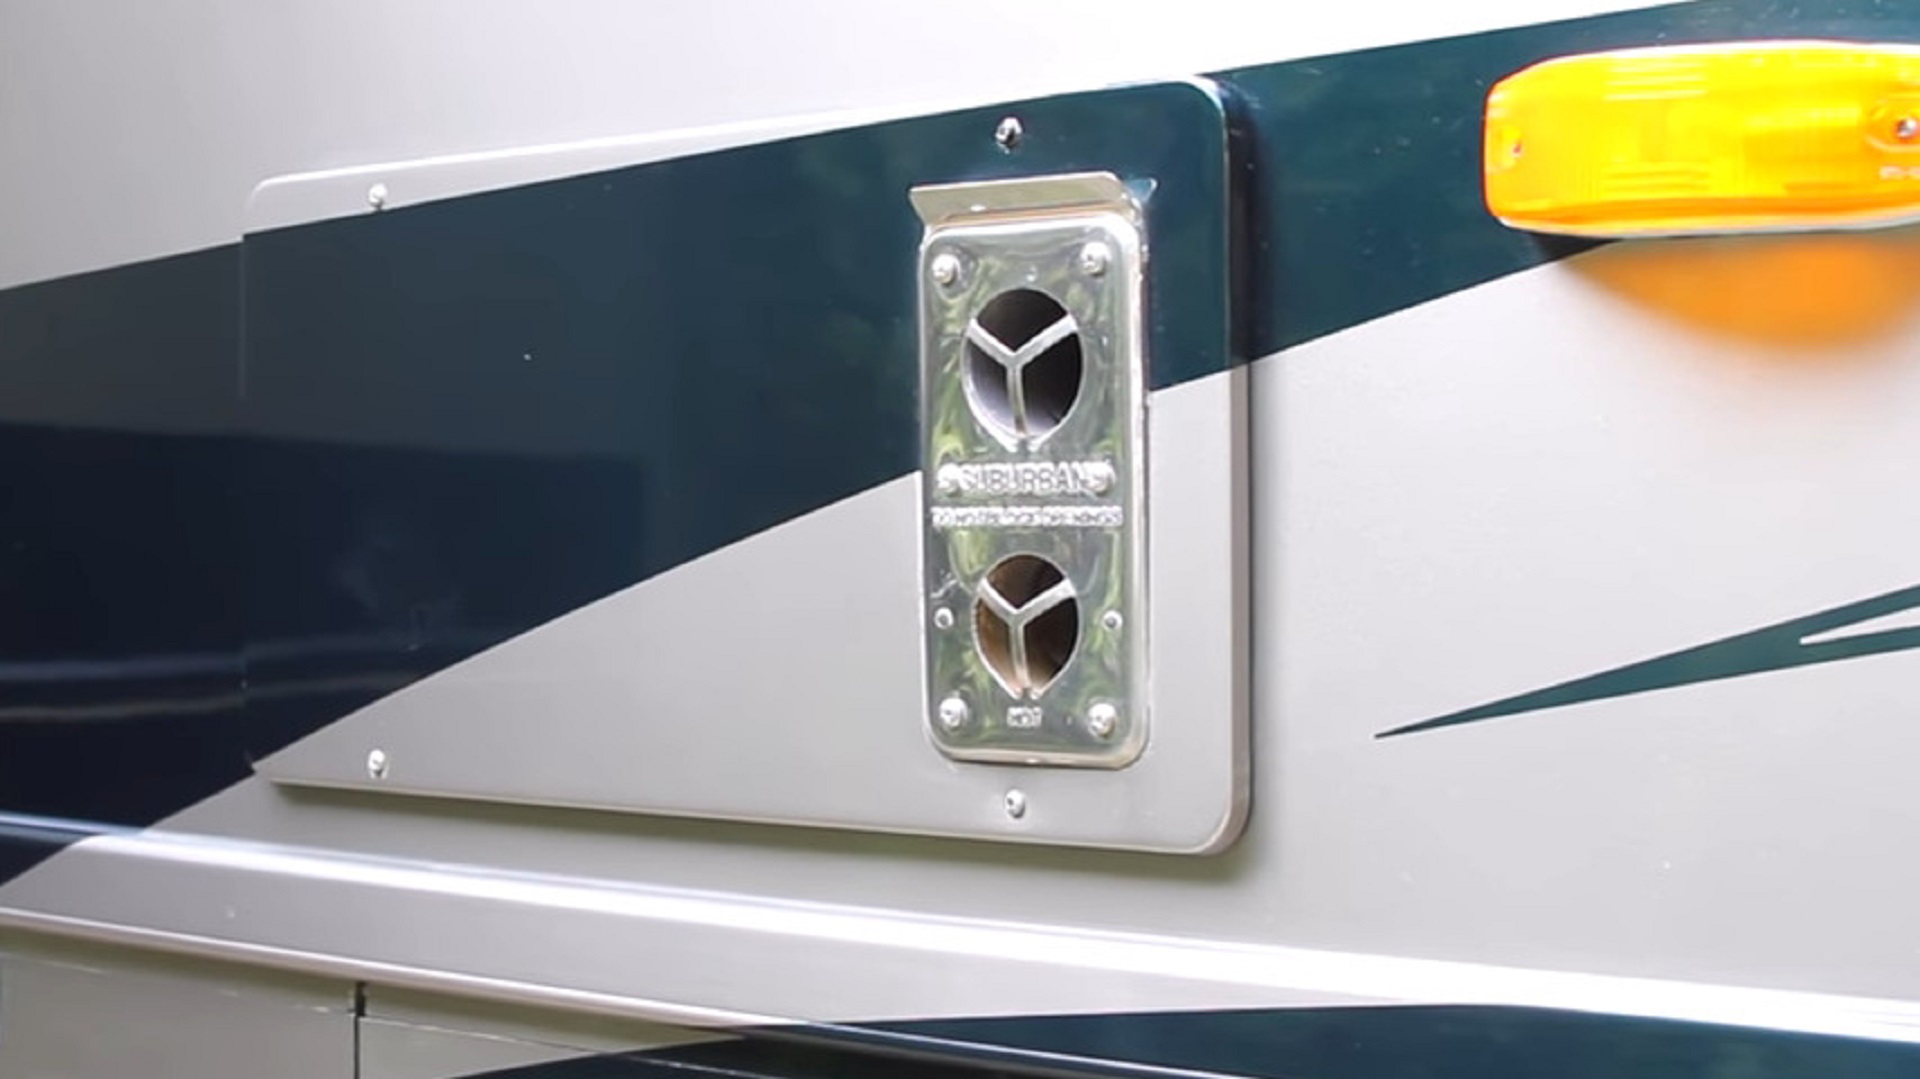 Is your RV furnace not working? Maybe the furnace vents on the exterior are blocked?